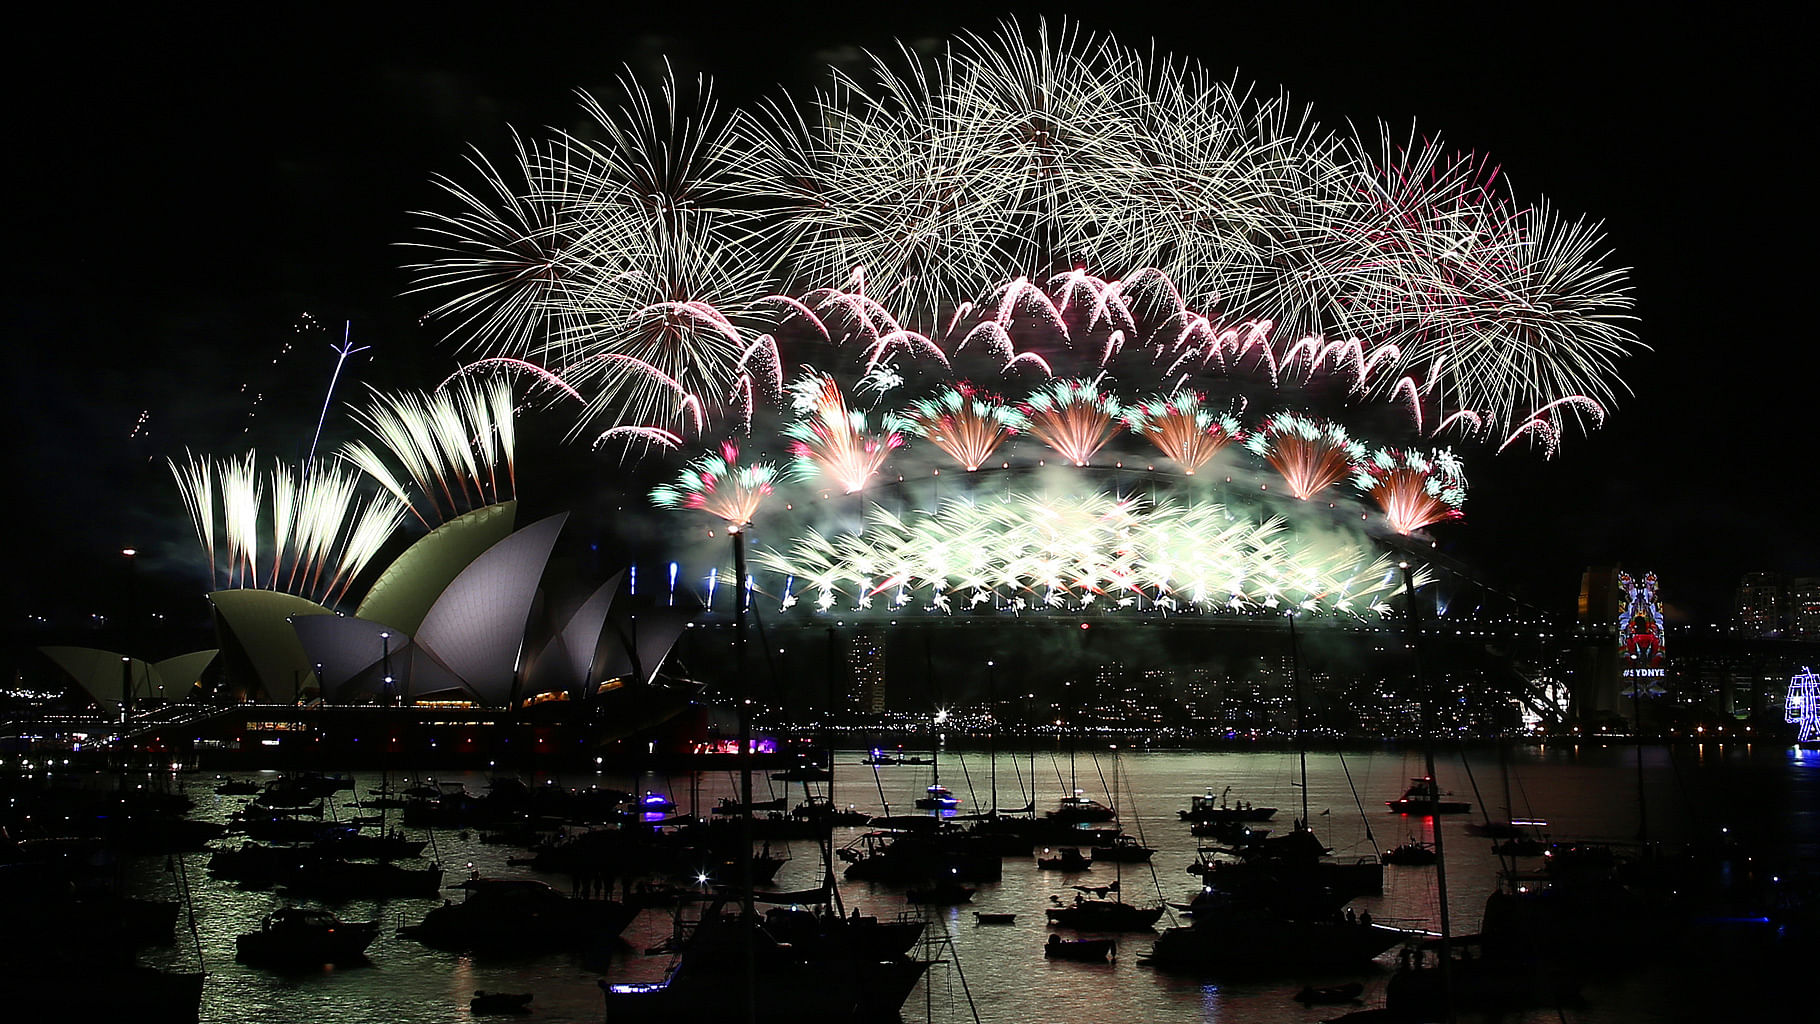 Fireworks explode over the Opera House and Harbour Bridge during pre-New Year’s Eve fireworks display in Sydney, Australia. (Photo: AP)